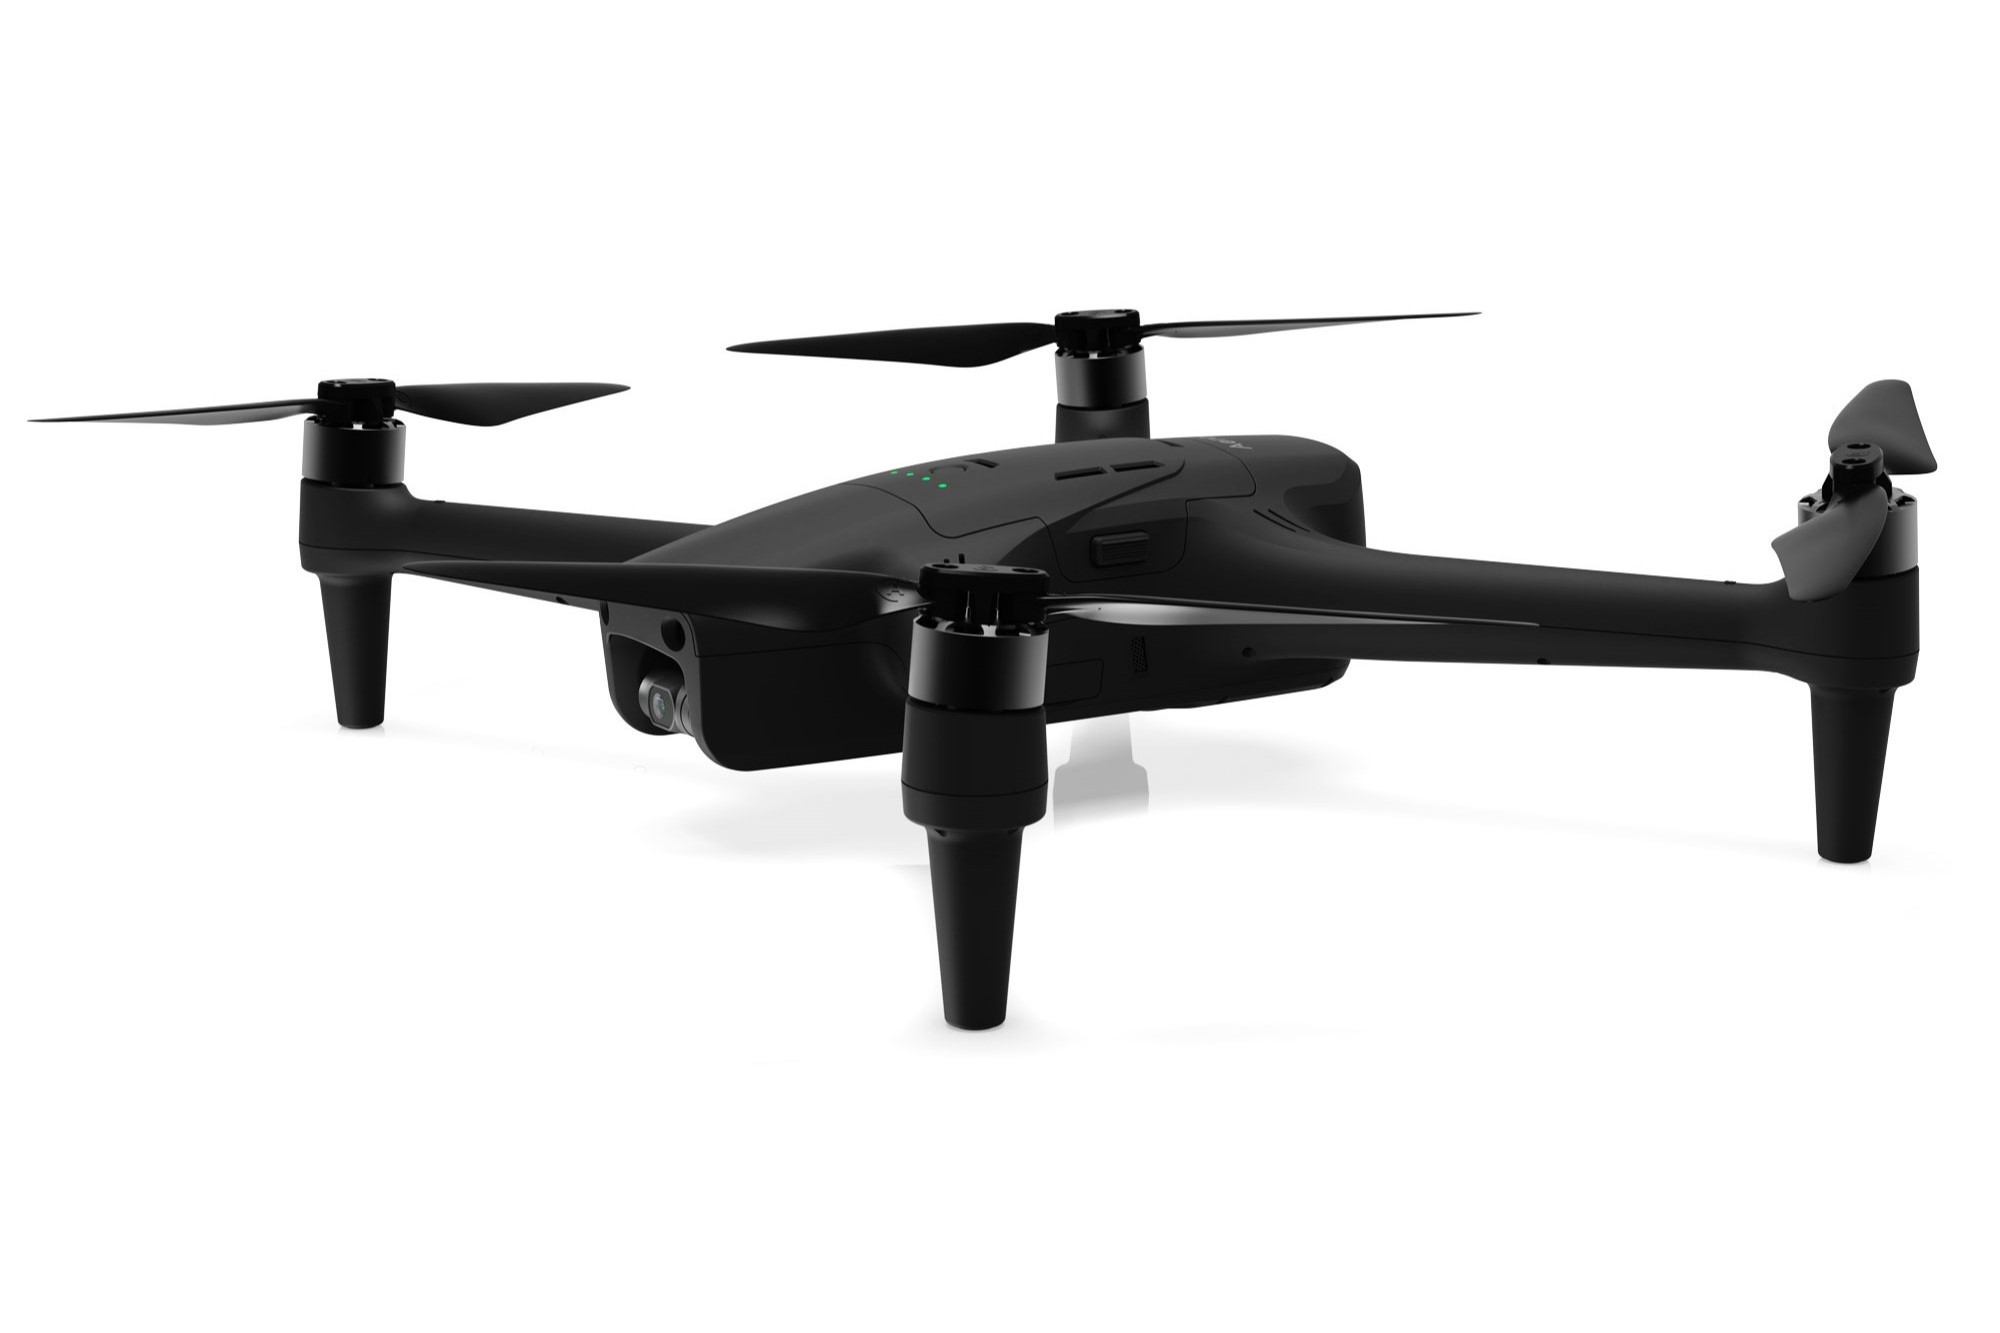 Aeroo Pro drone as seen from the front right and slightly above.